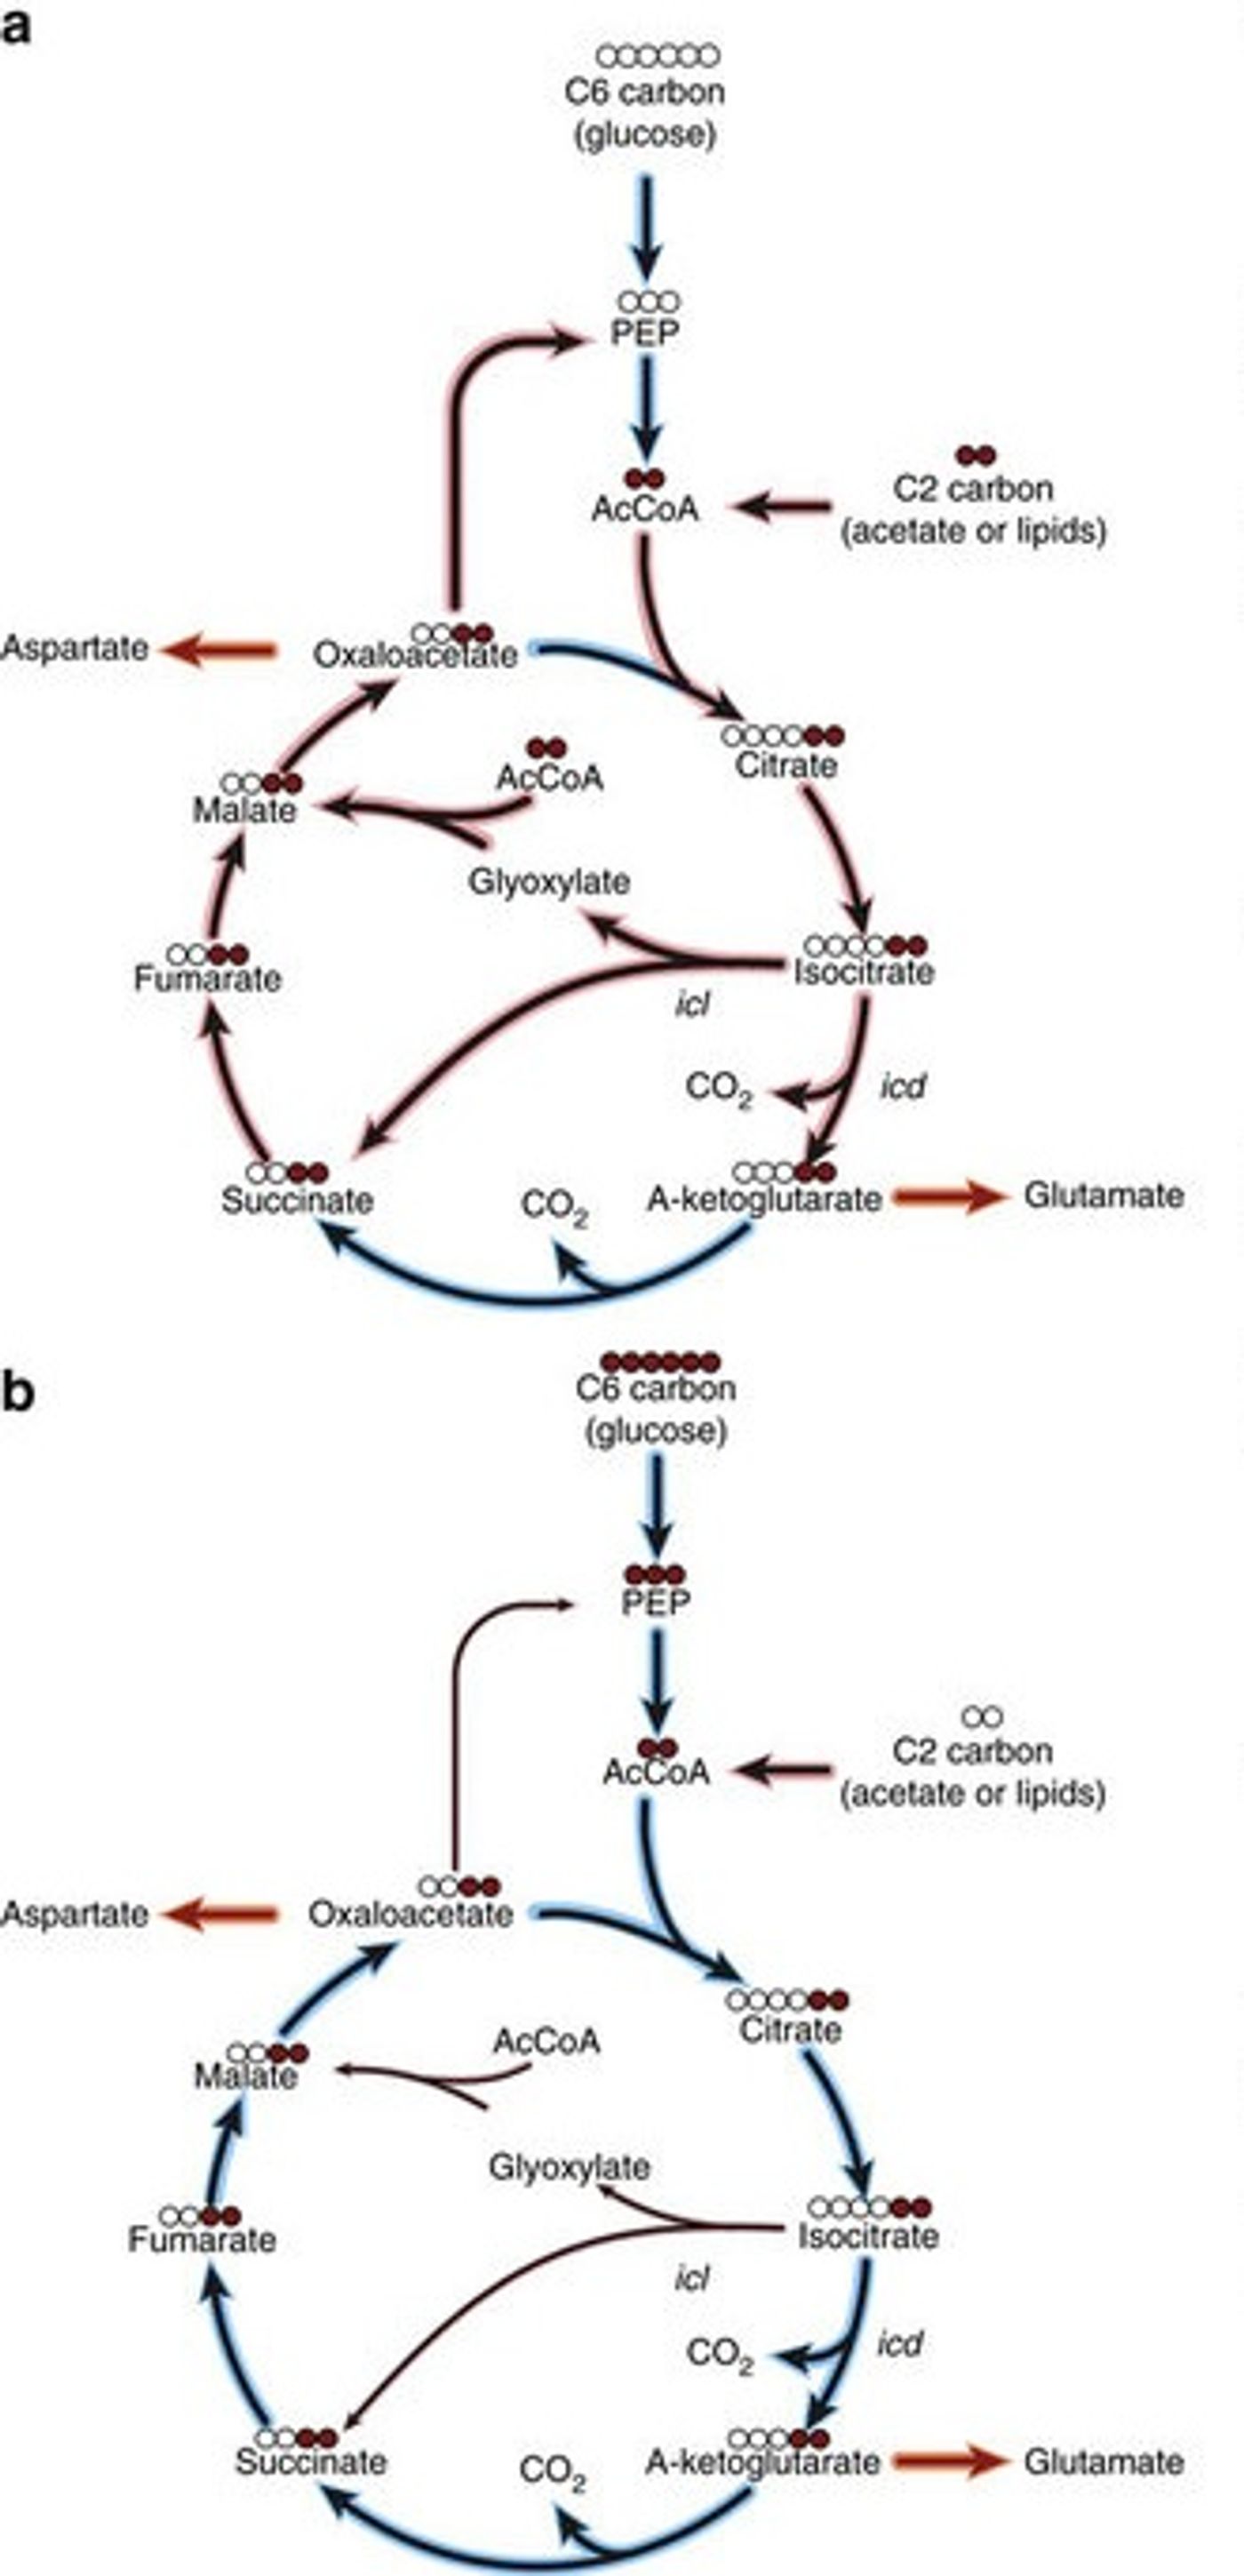 Schematic of fluxes into the TCA cycle and glyoxylate shunt following shift from glucose (blue shading) to radiolabelled acetate (red shading). (b) Schematic of fluxes into the TCA cycle and glyoxylate shunt following shift from acetate (red shading) to radiolabelled glucose (blue shading). / Credit: Nature Communications Murima et al